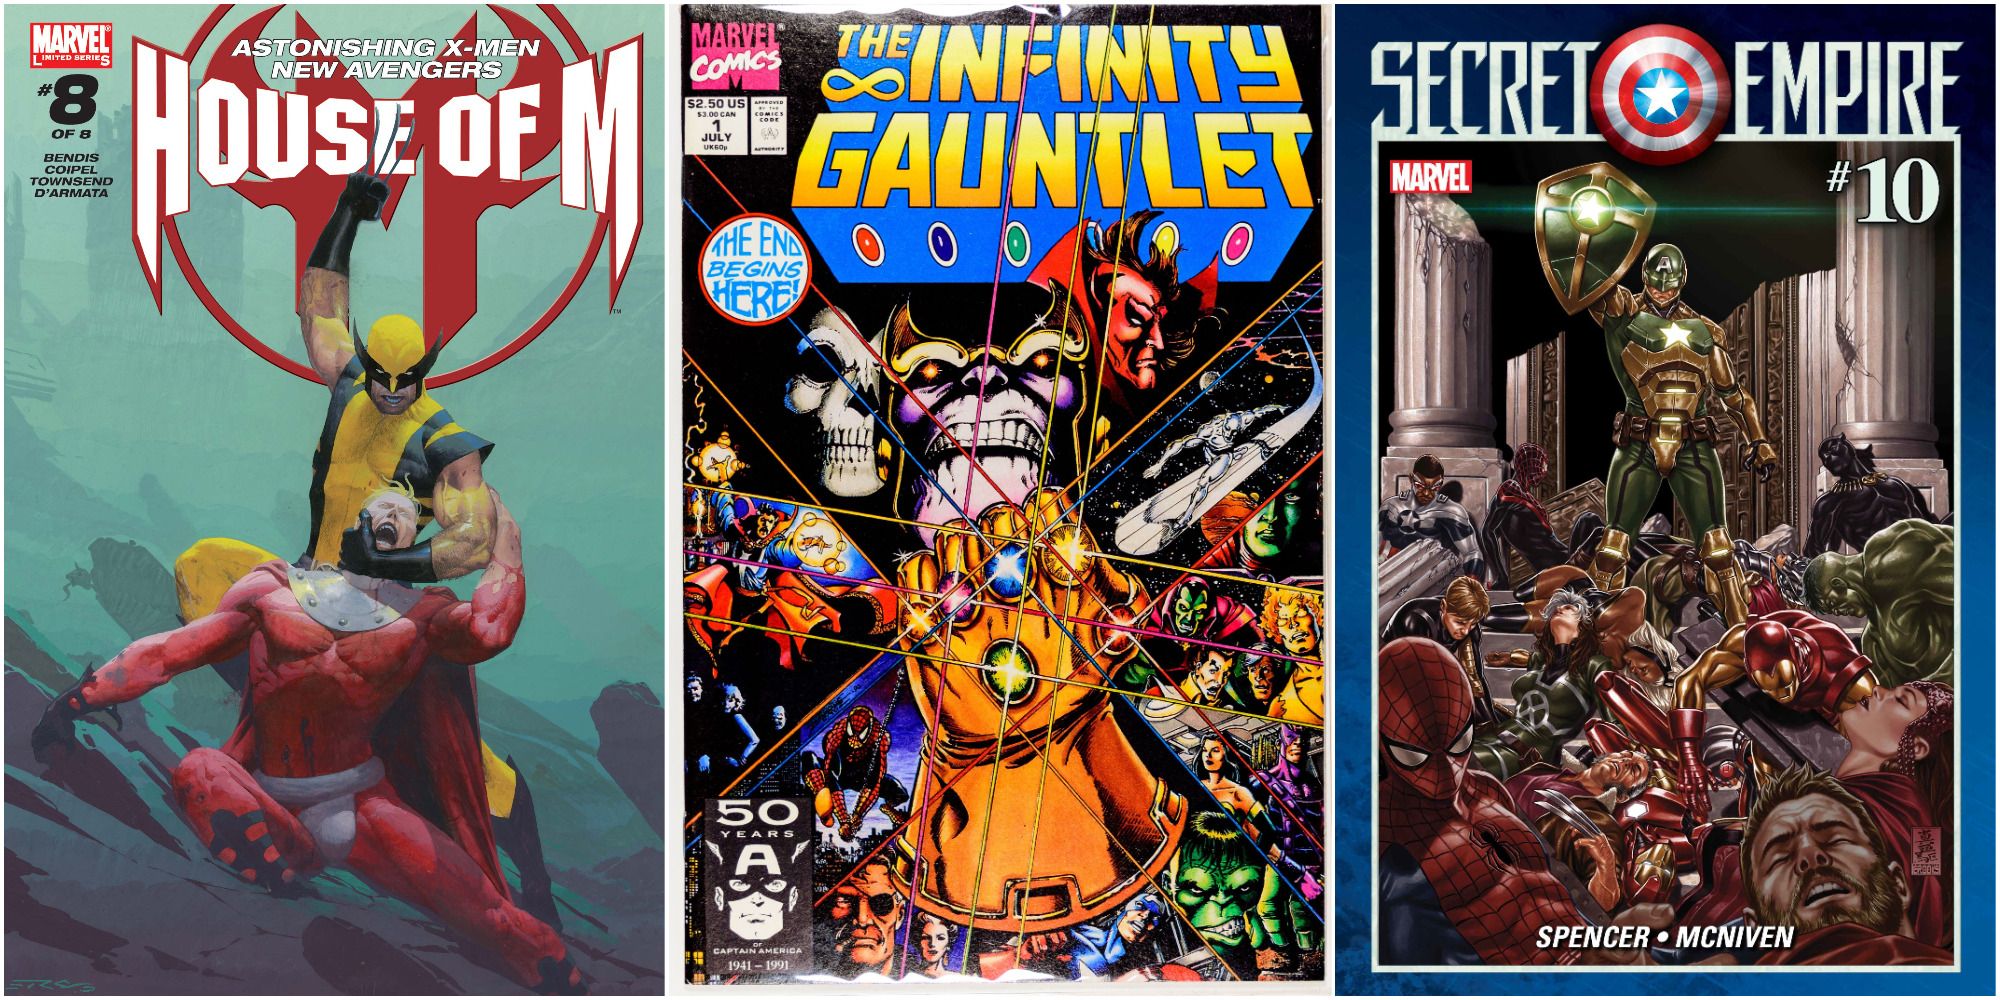 House of M, Infinity Gauntlet, and Secret Empire